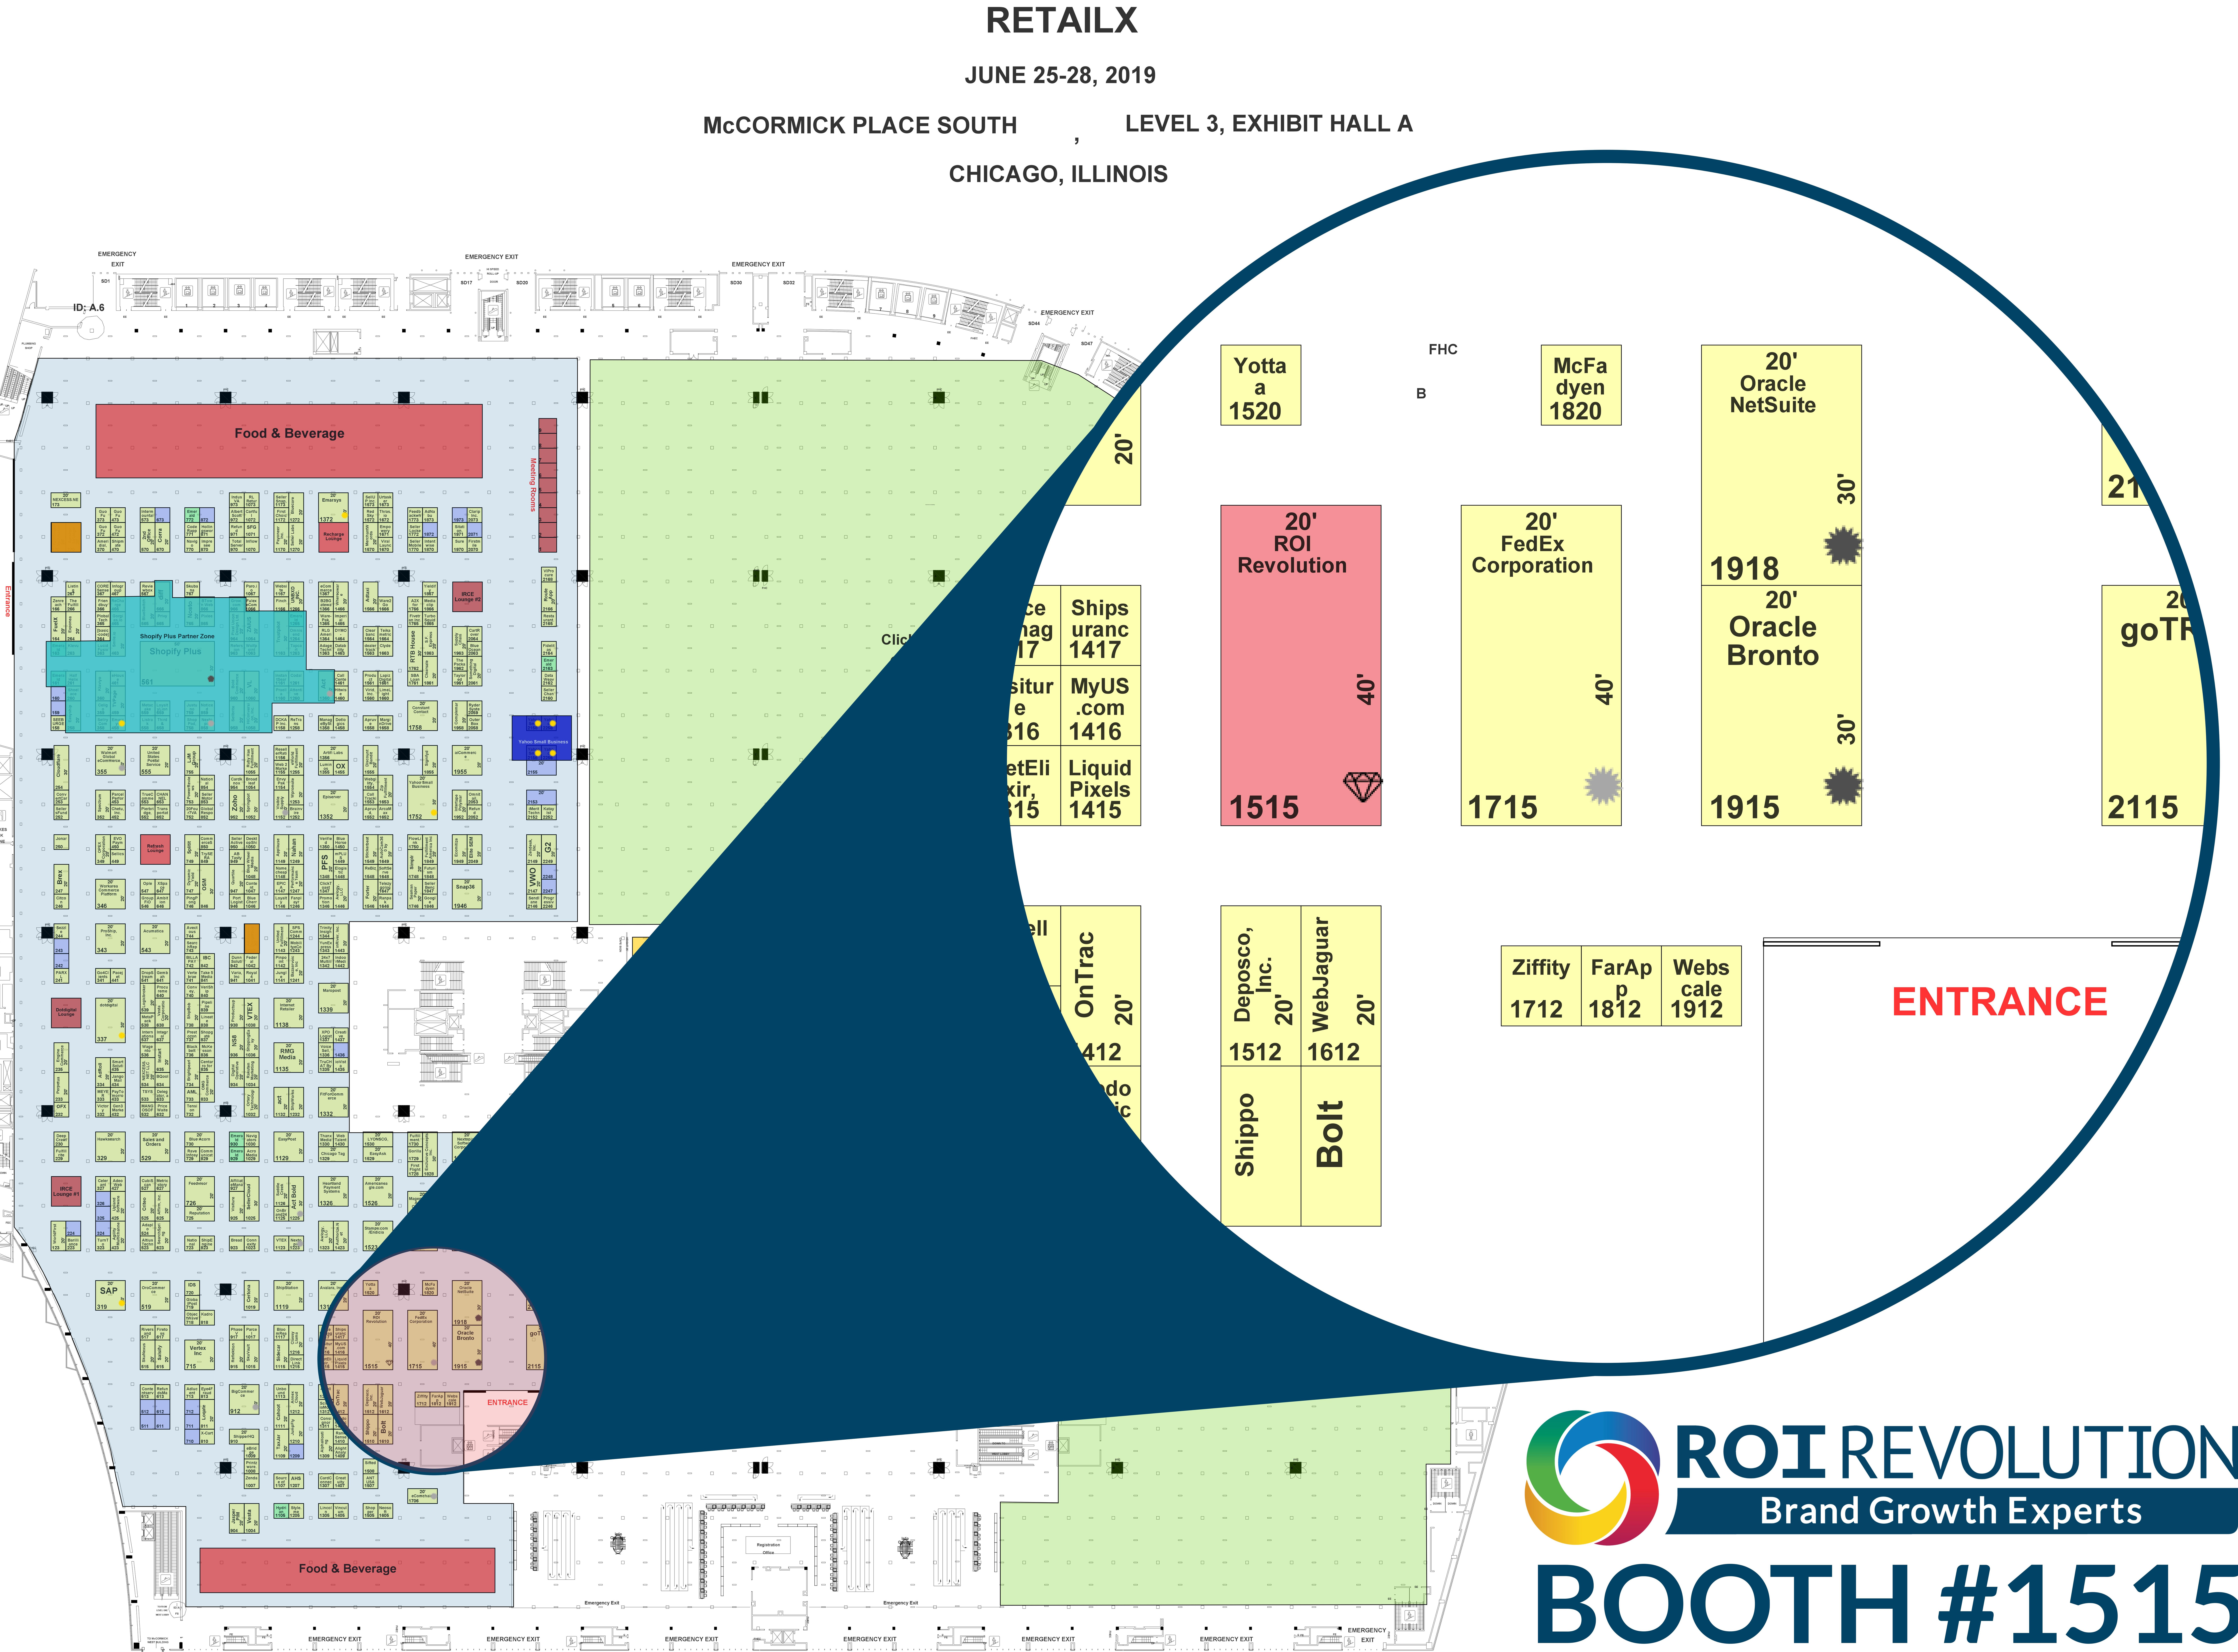 map of IRCE 2019 exhibit hall pointing out ROI Revolution